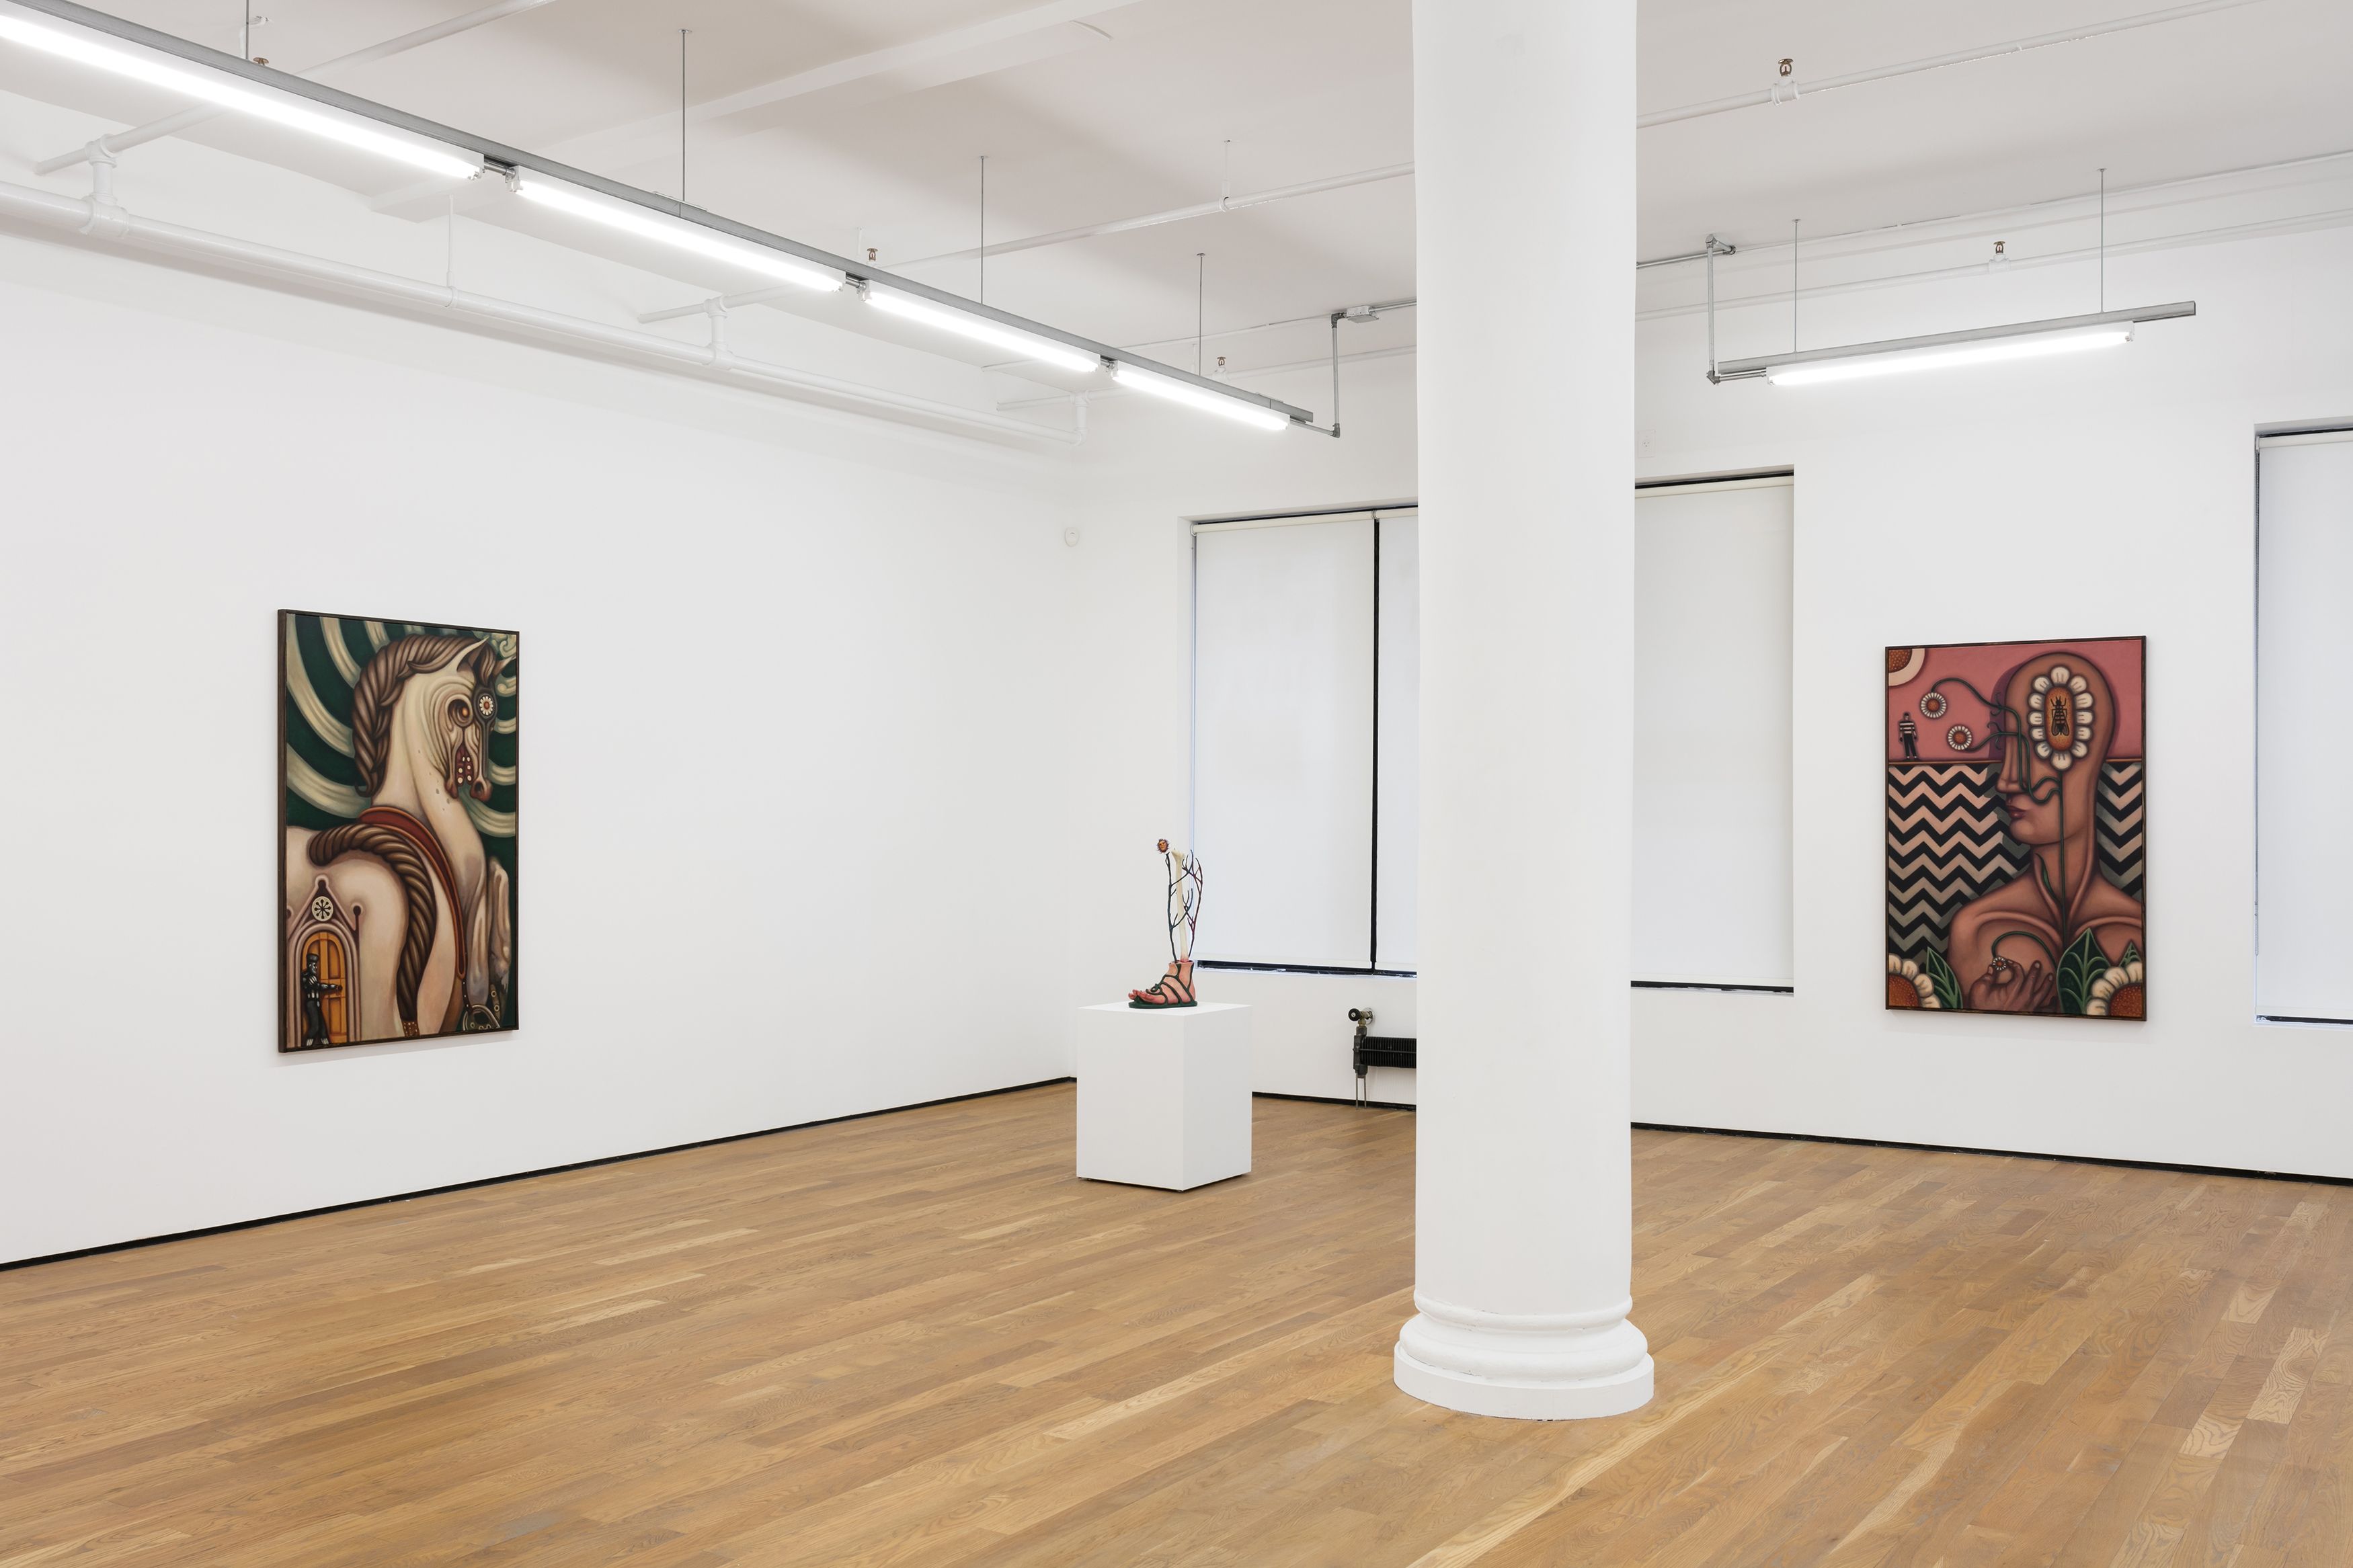 Justin Fitzpatrick, A Pulsation of the Artery, 2019, installation view, Foxy Production, New York.